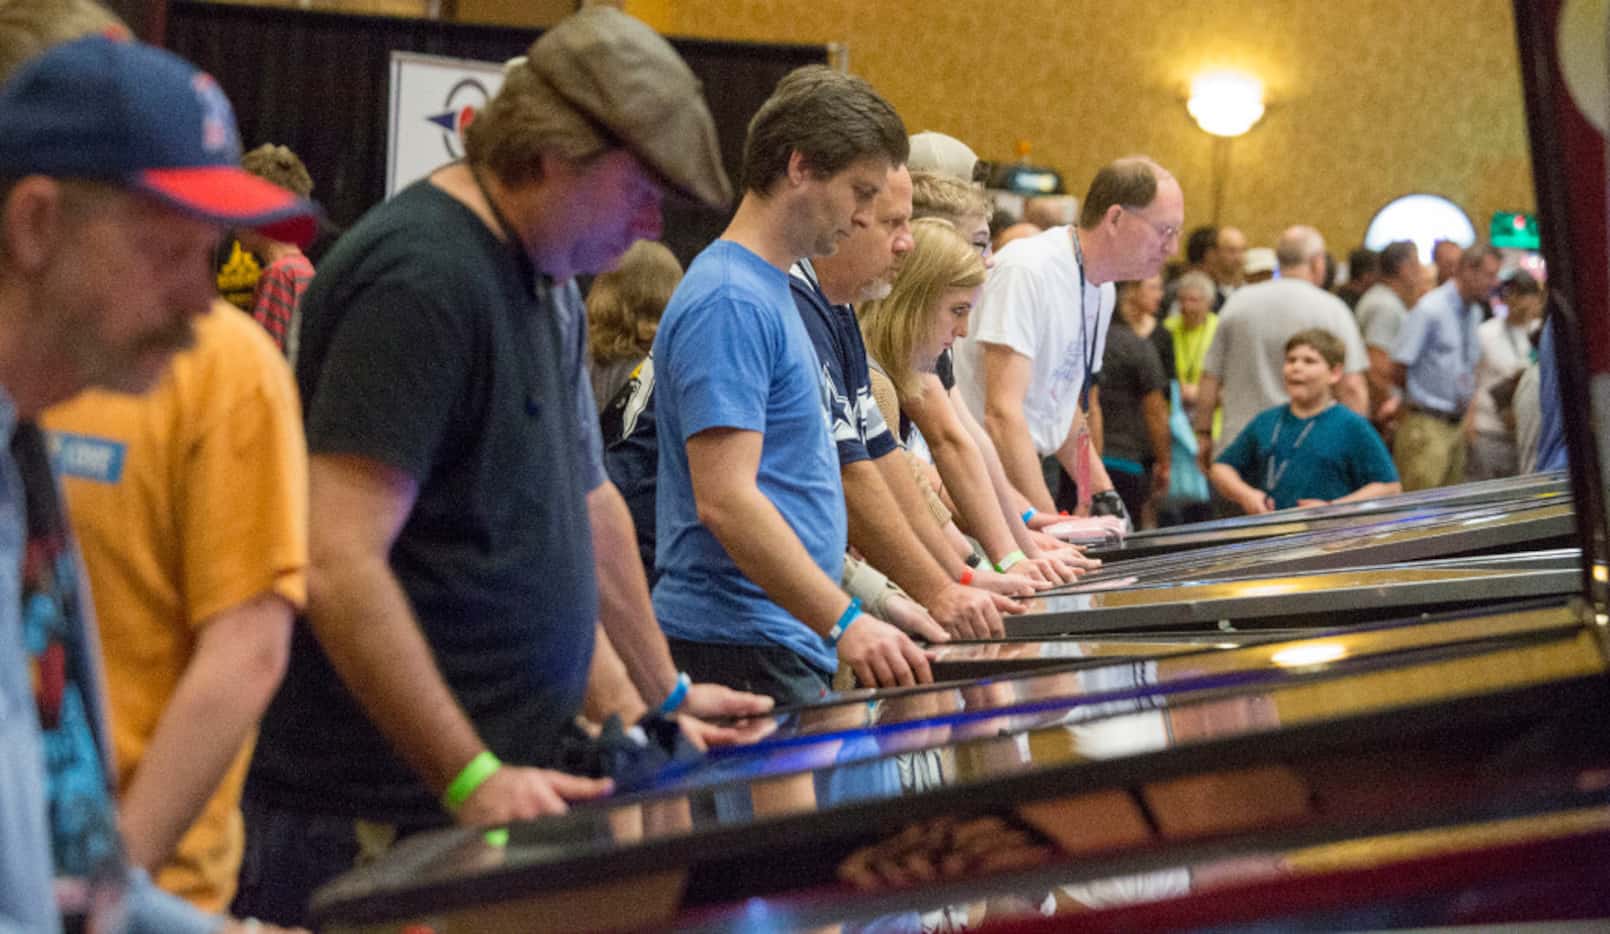 Pinball enthusiast of all ages take turns at the hundreds of games at the Texas Pinball...